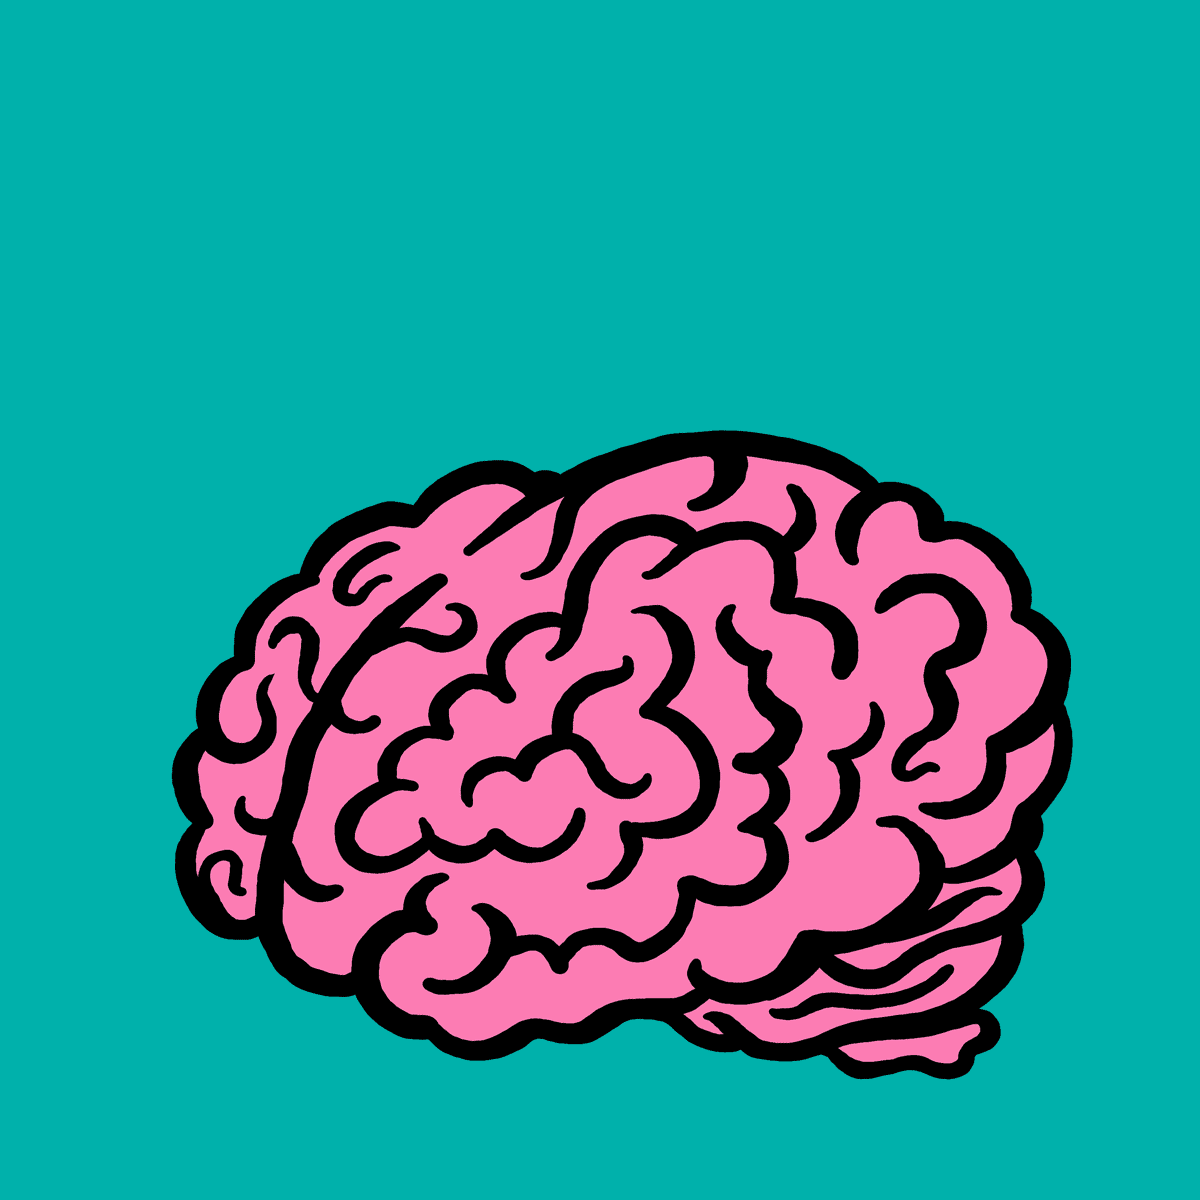 An image of a brain farting. The brain is pink with a black outline. It is on a teal background. The fart is yellow.